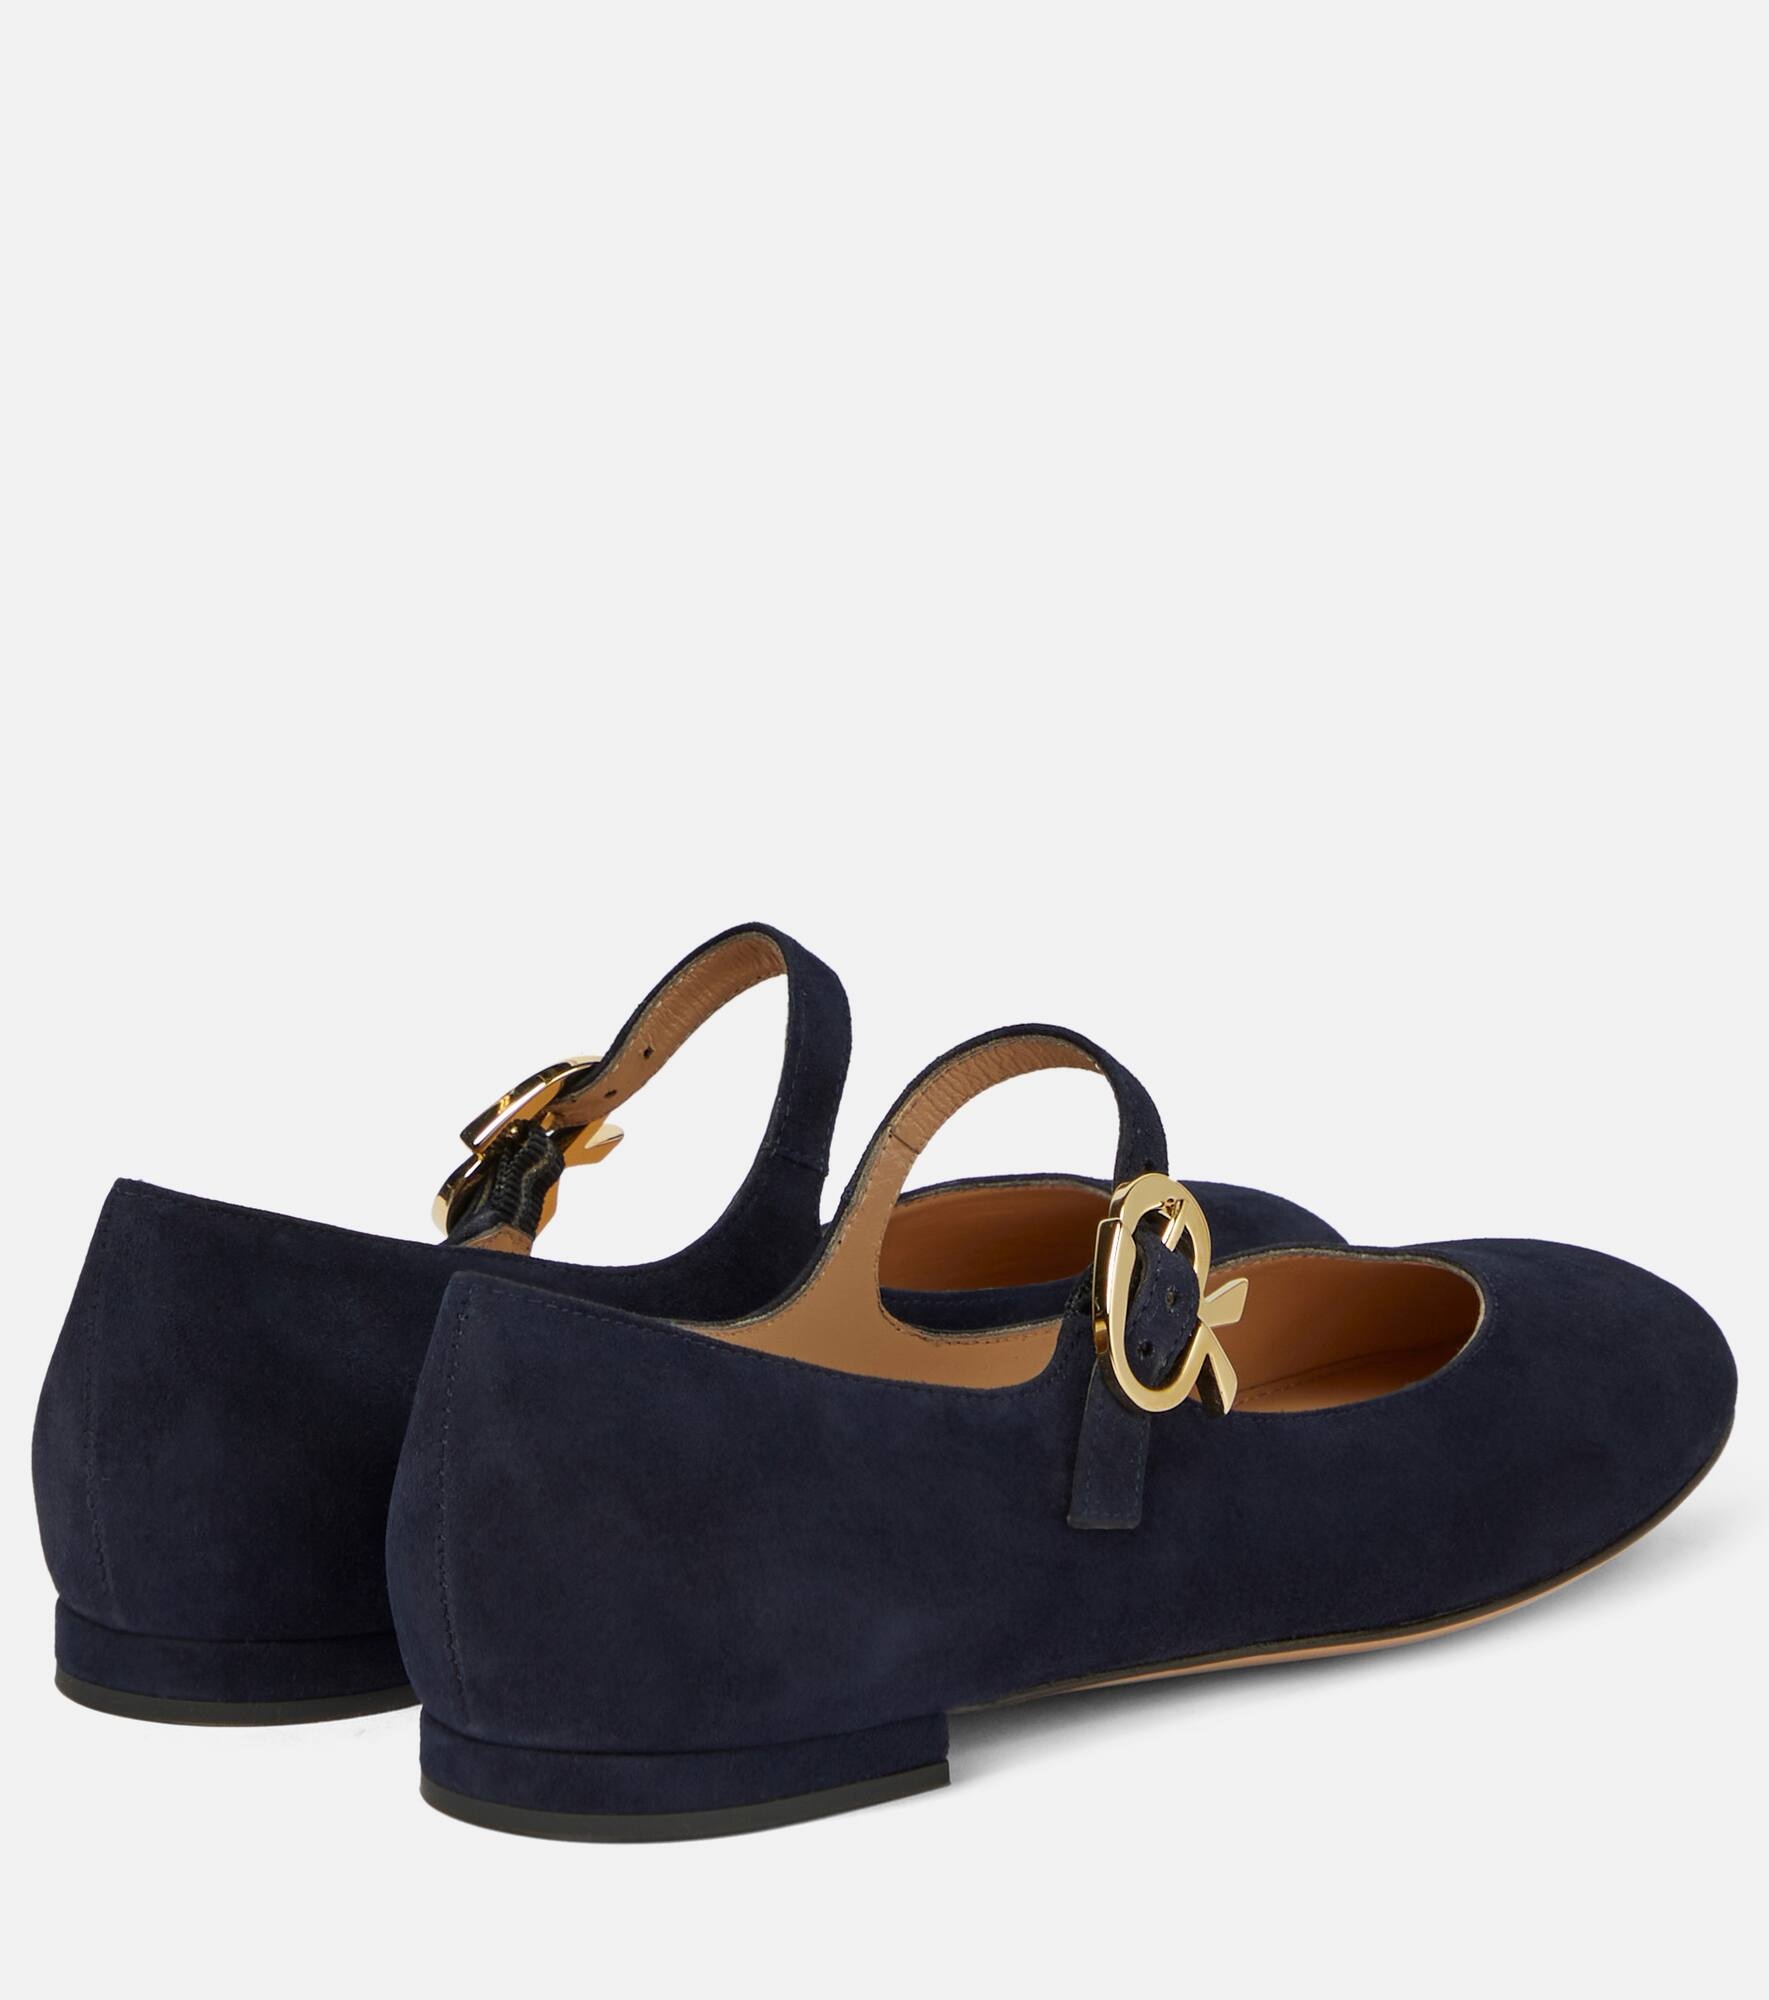 Mary Ribbon suede ballet flats - 3